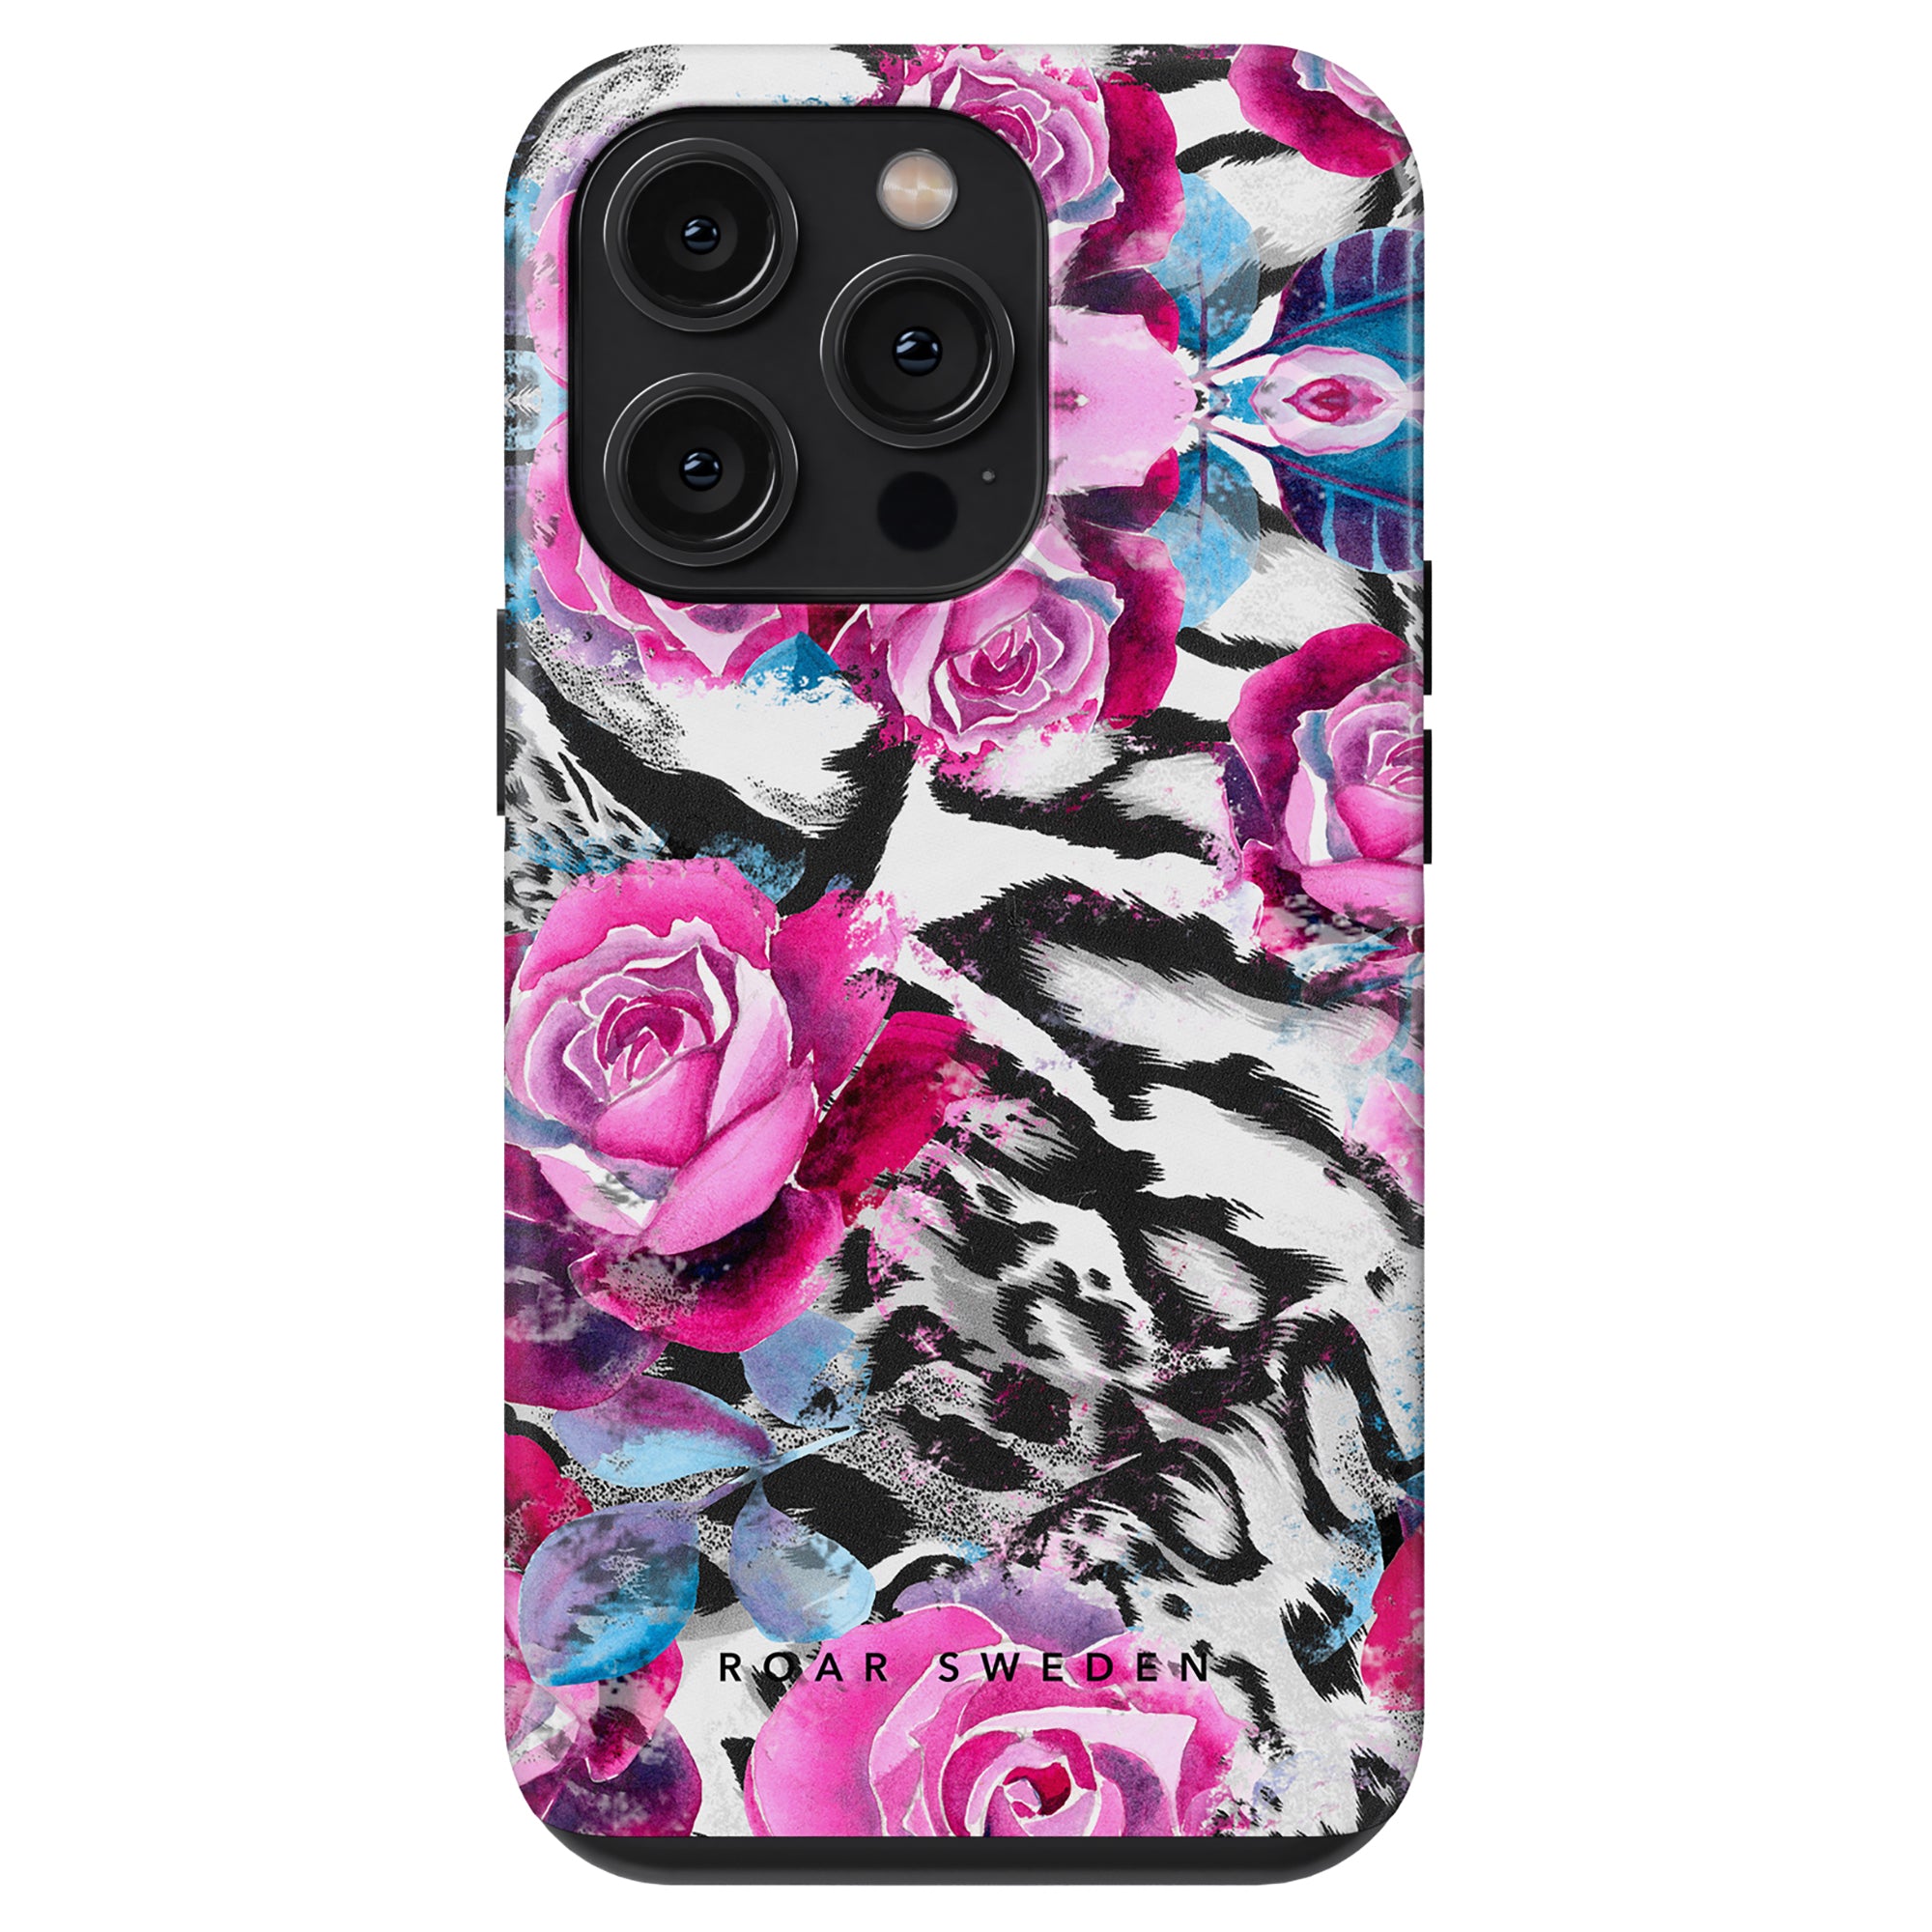 Smartphone case featuring a Rosy Wildcat - Tough Case design with pink and purple roses on a leopard-patterned background, designed for a model with three camera lenses.